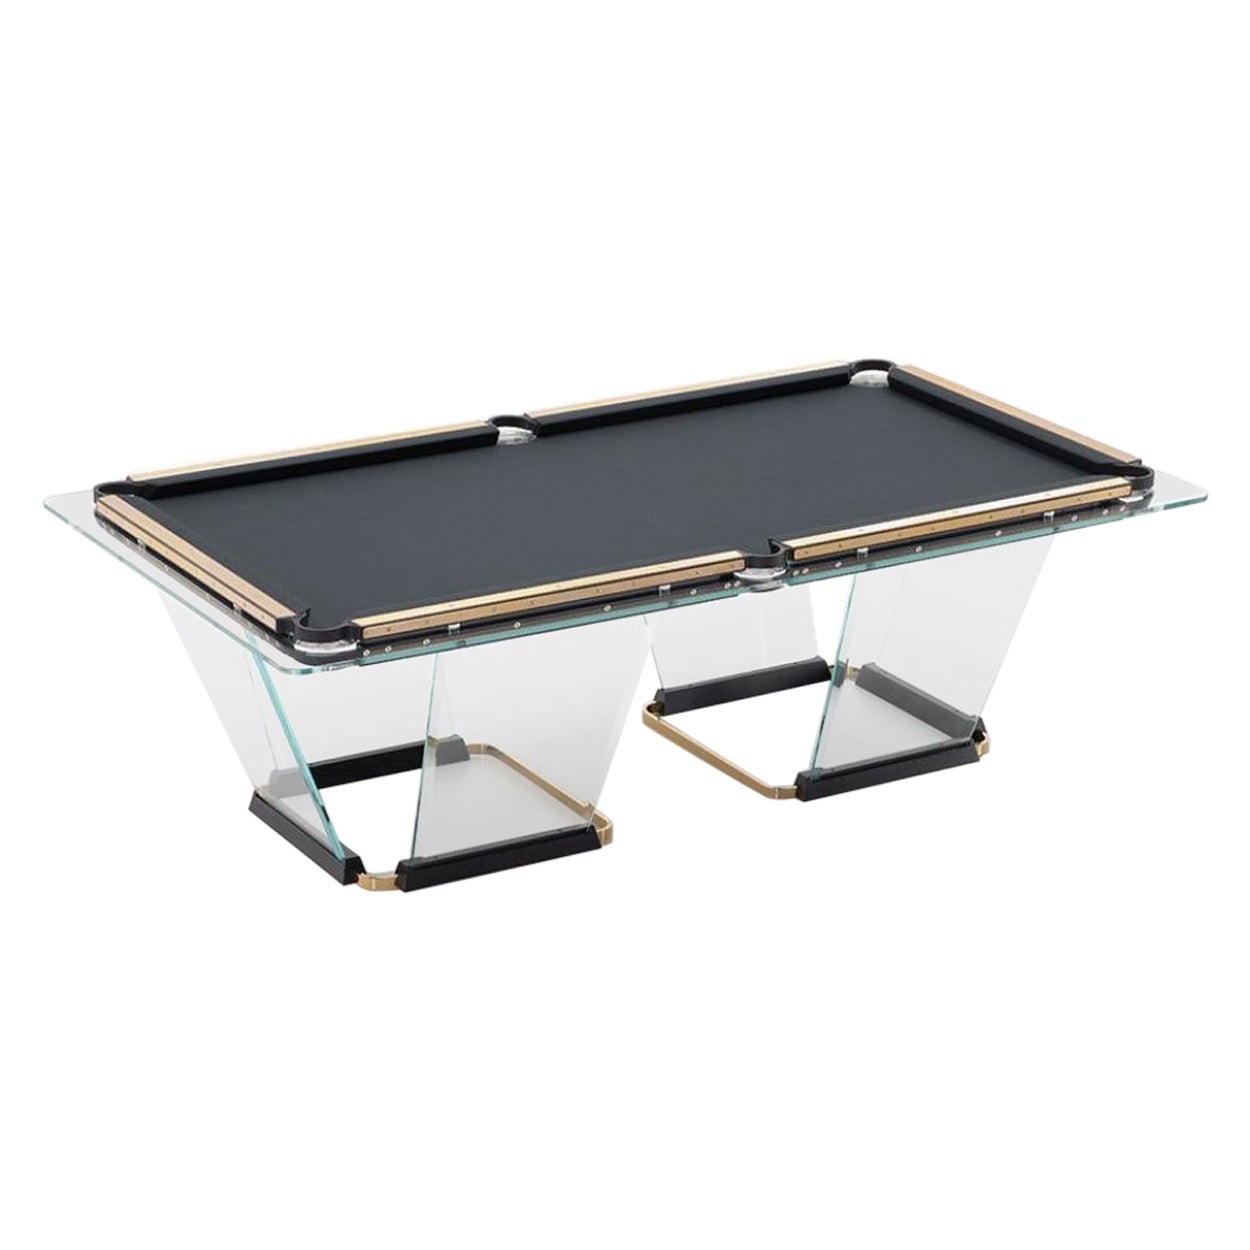 Teckell T1.3 Crystal 9-foot Pool Table in Gold by Marc Sadler